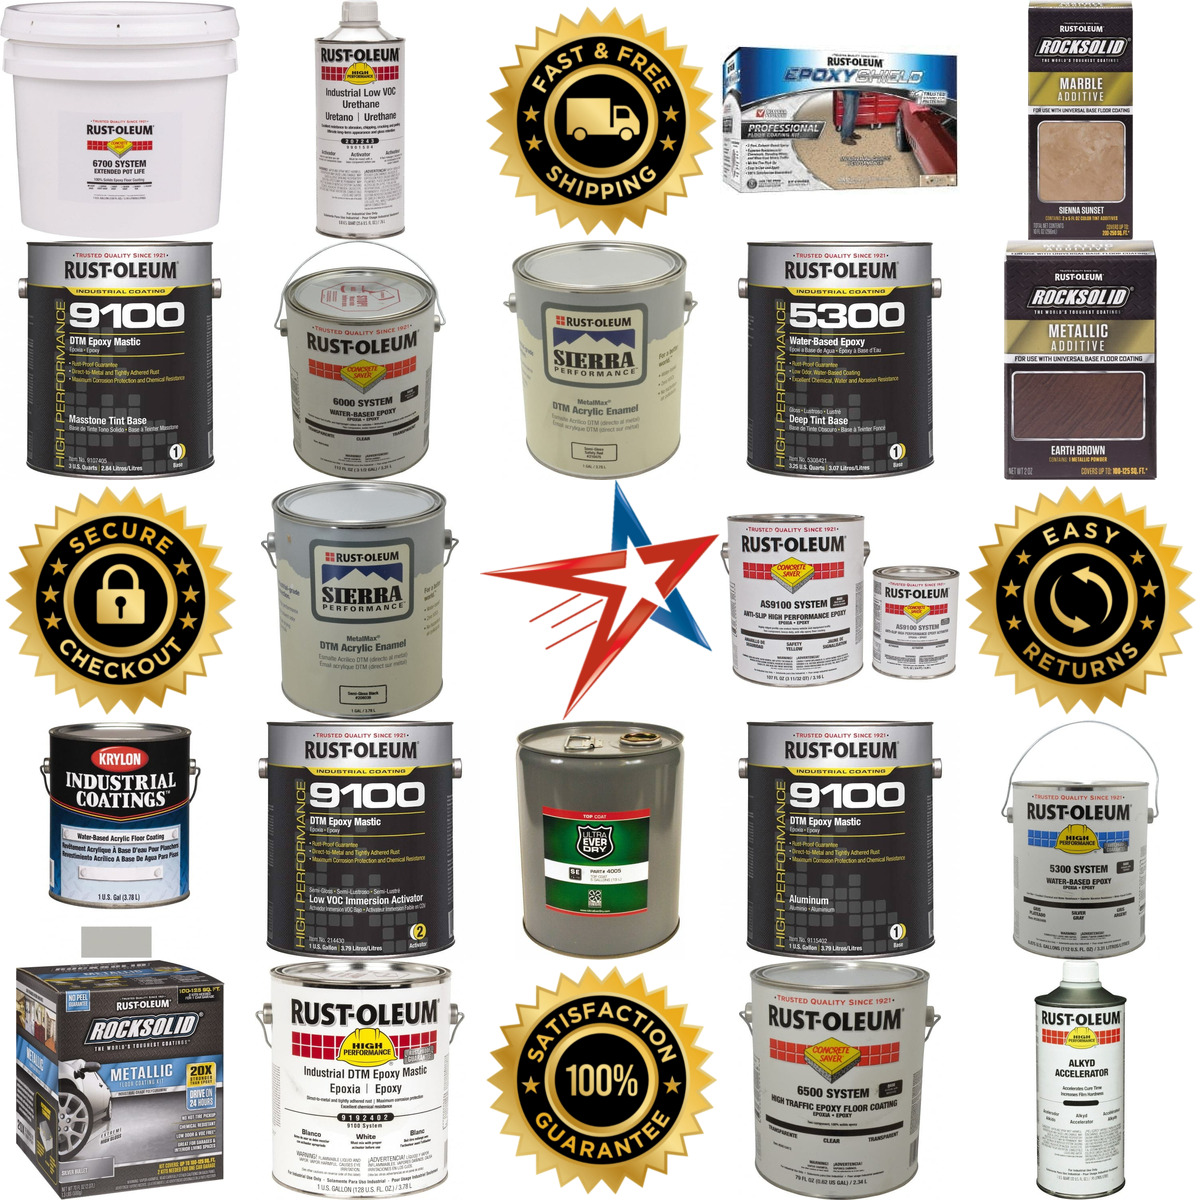 A selection of Sealants Finishers and Coatings products on GoVets